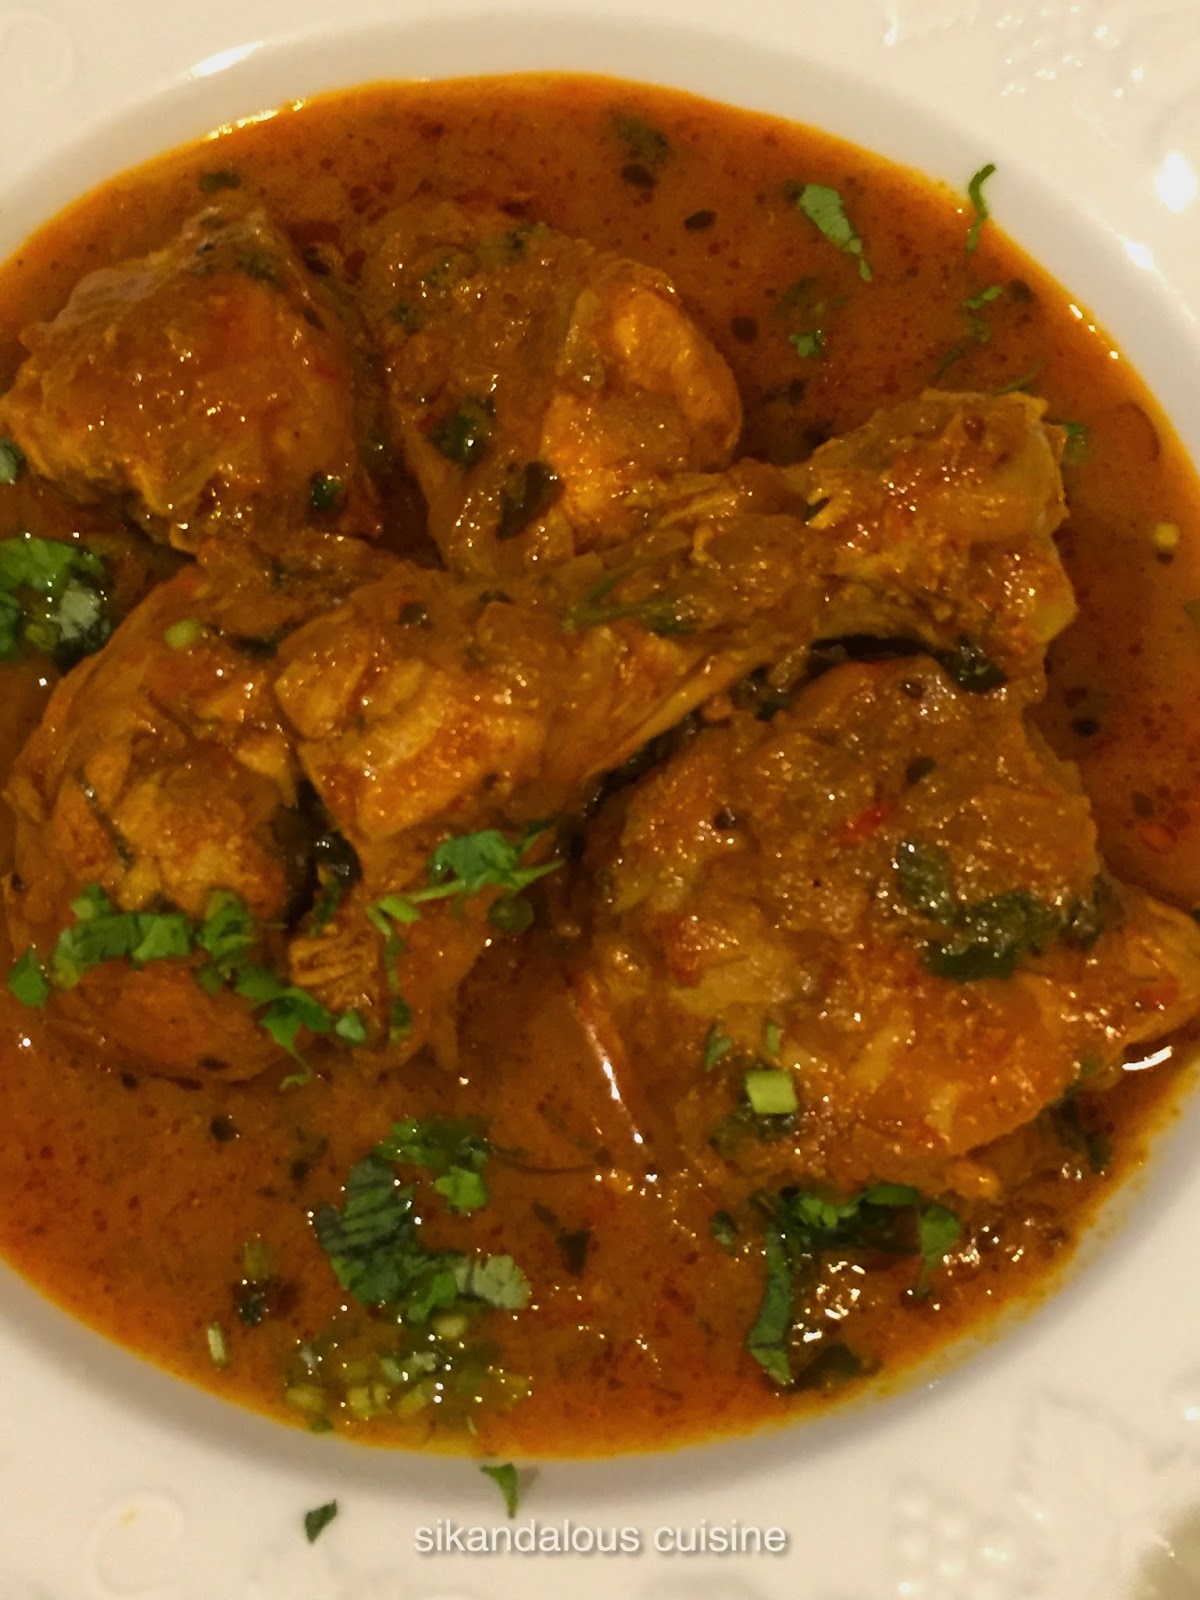 Sikandalous Cuisine: Ginger Infused Chicken Curry #sikandalouscuisine